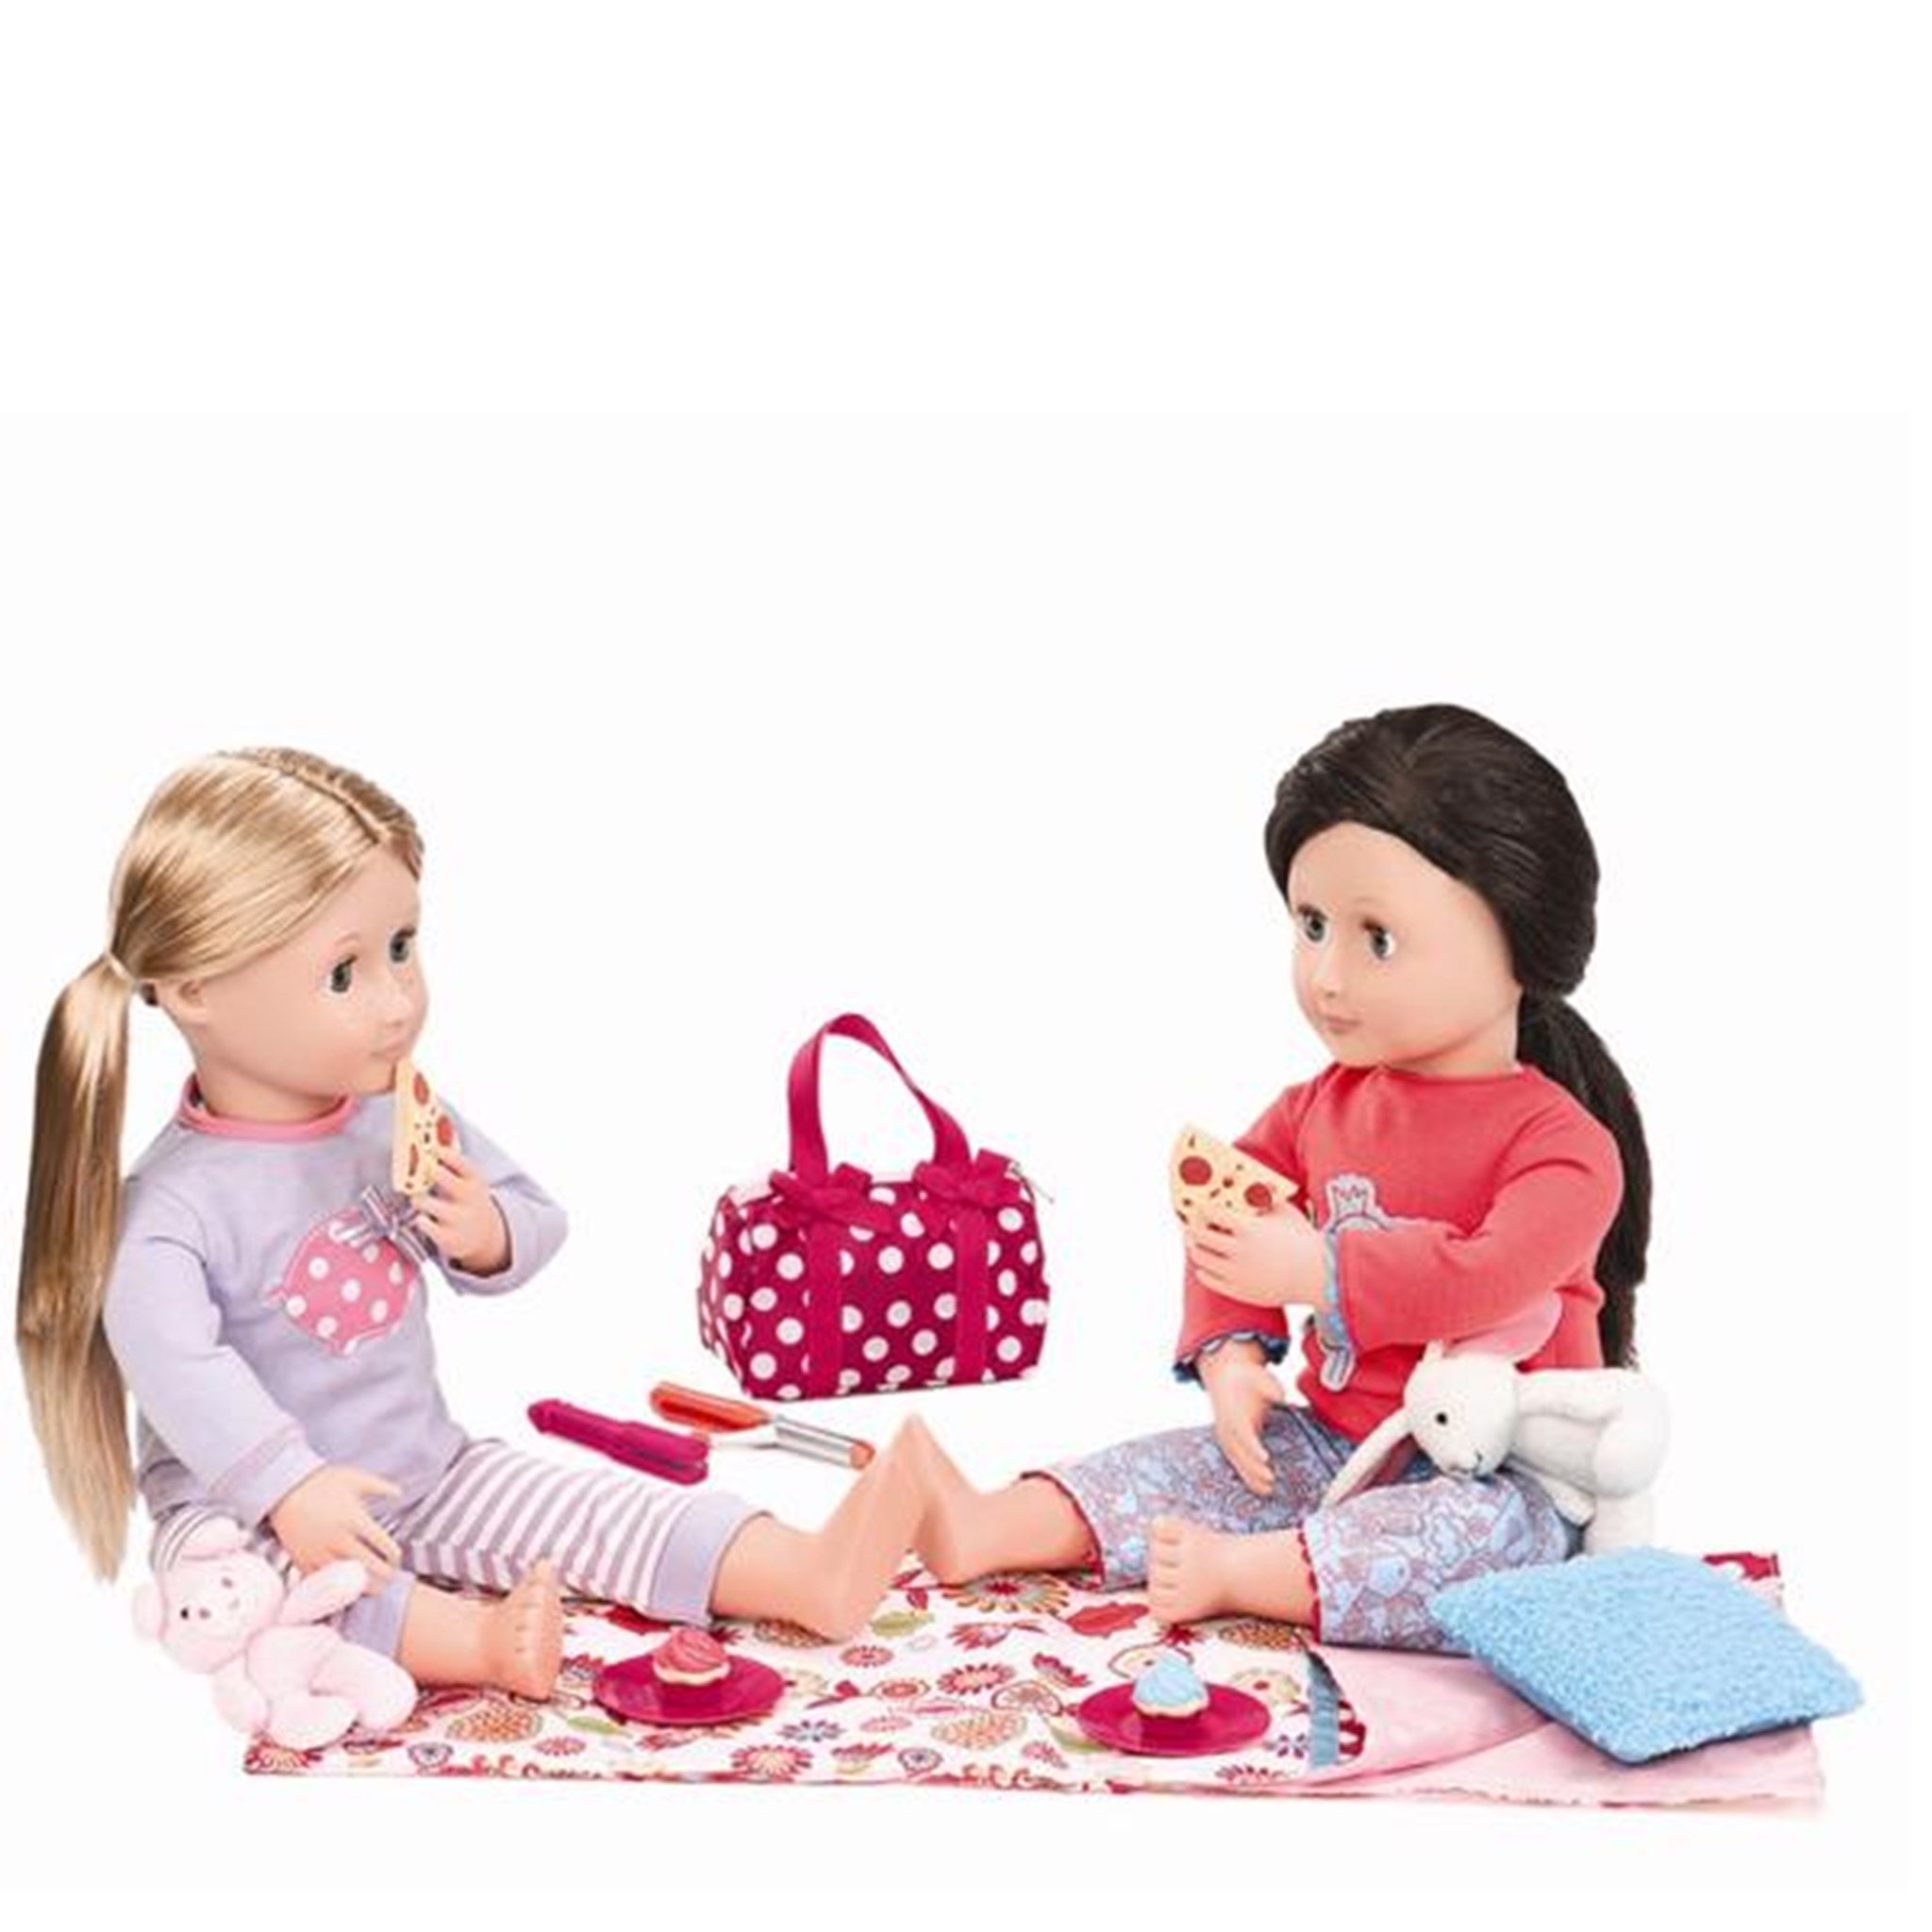 Our Generation Doll Accessories - Pyjamas Party 2